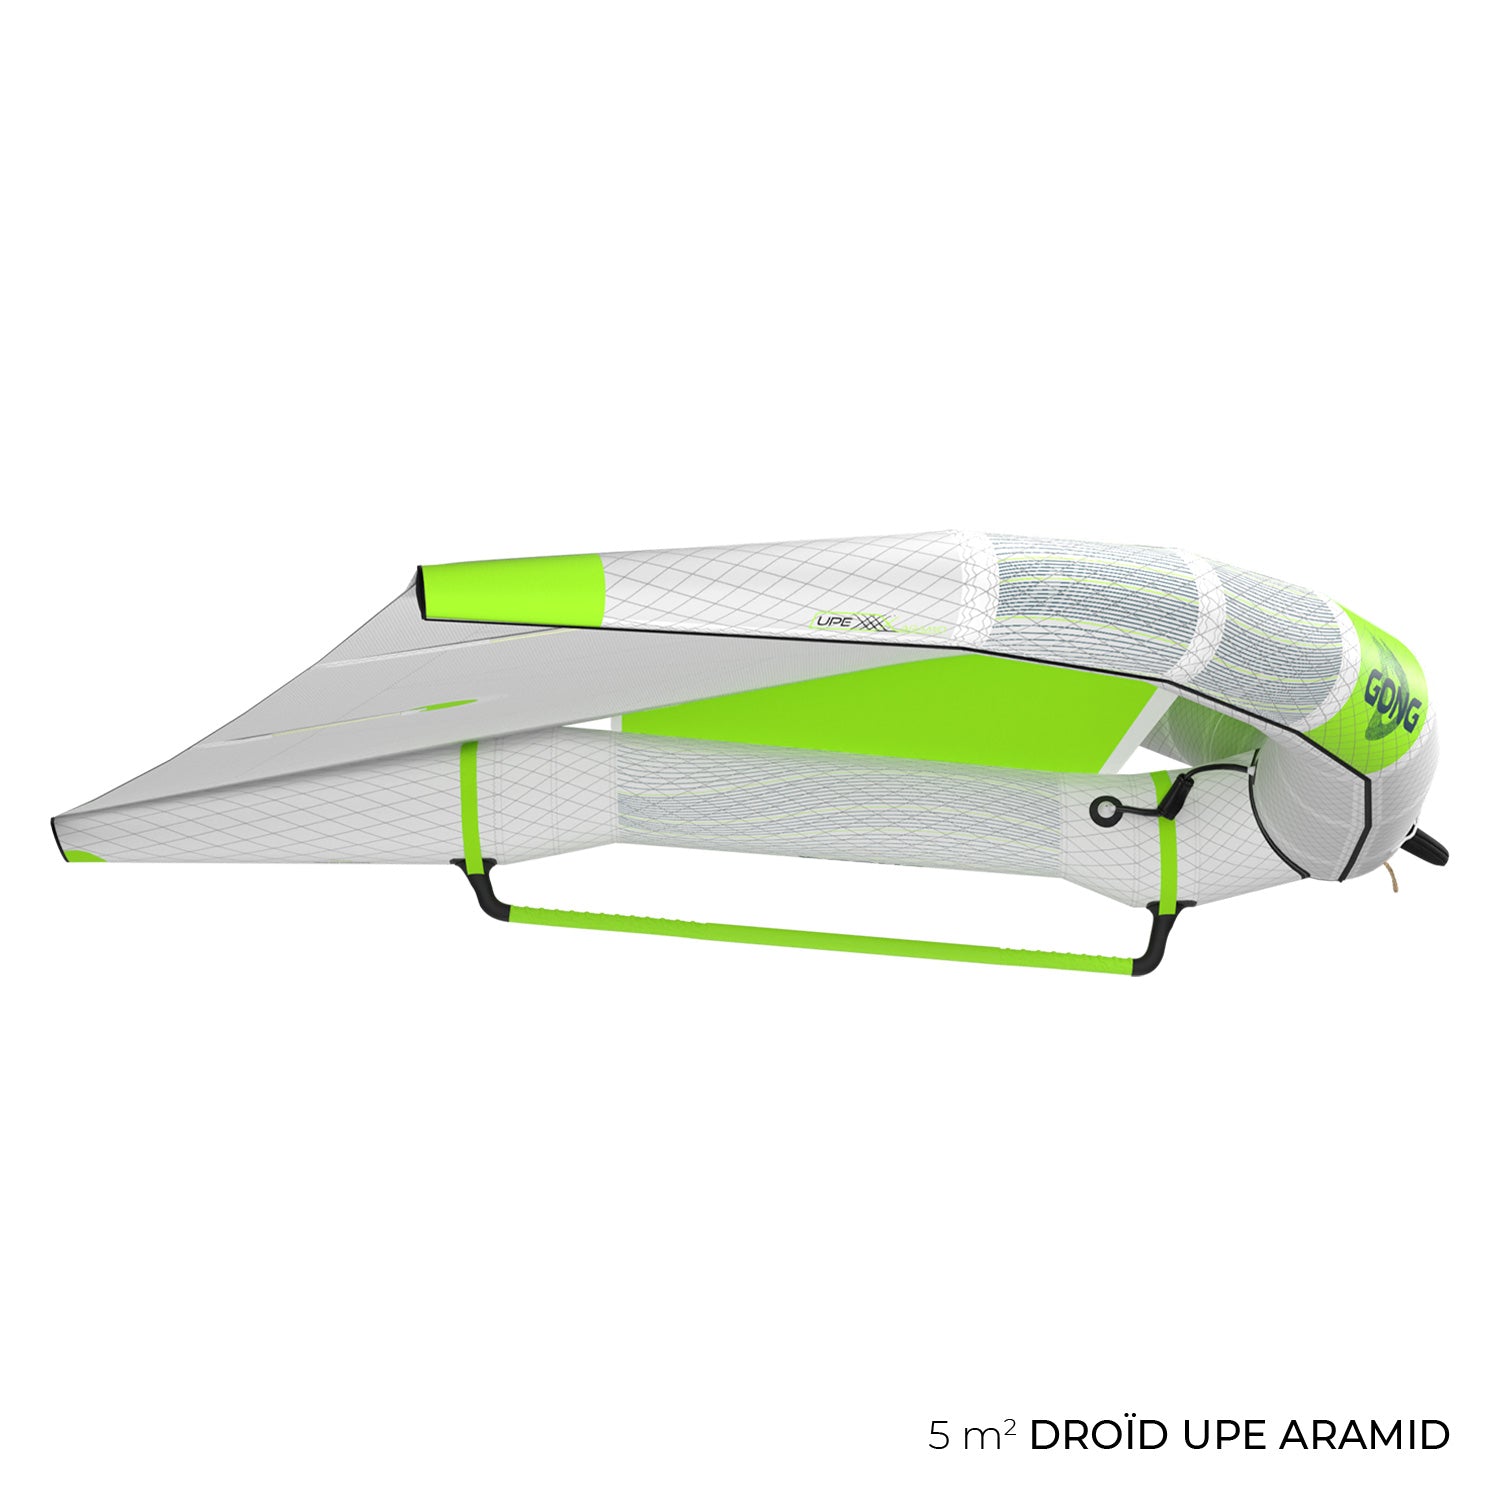 Wing Droid UPE Aramid White/Green 3,5M Occasion 7070